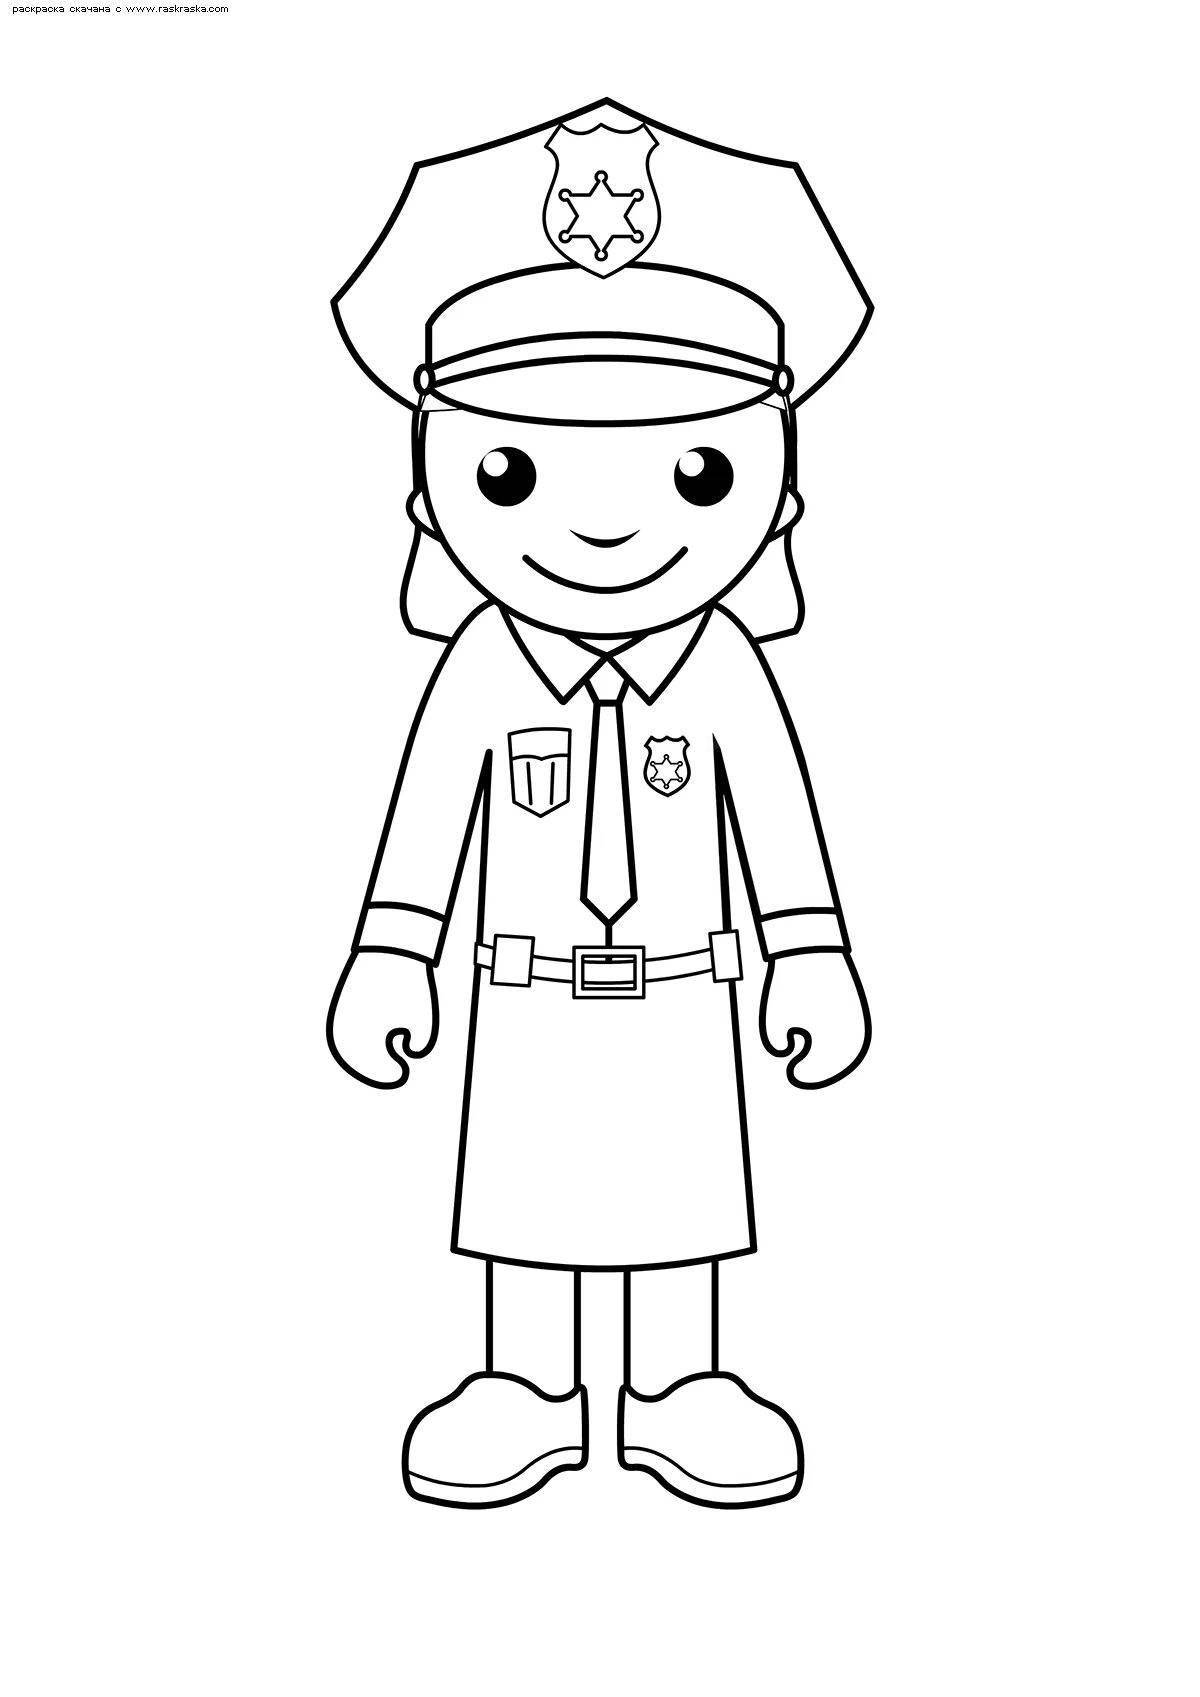 Playful coloring page for police kids